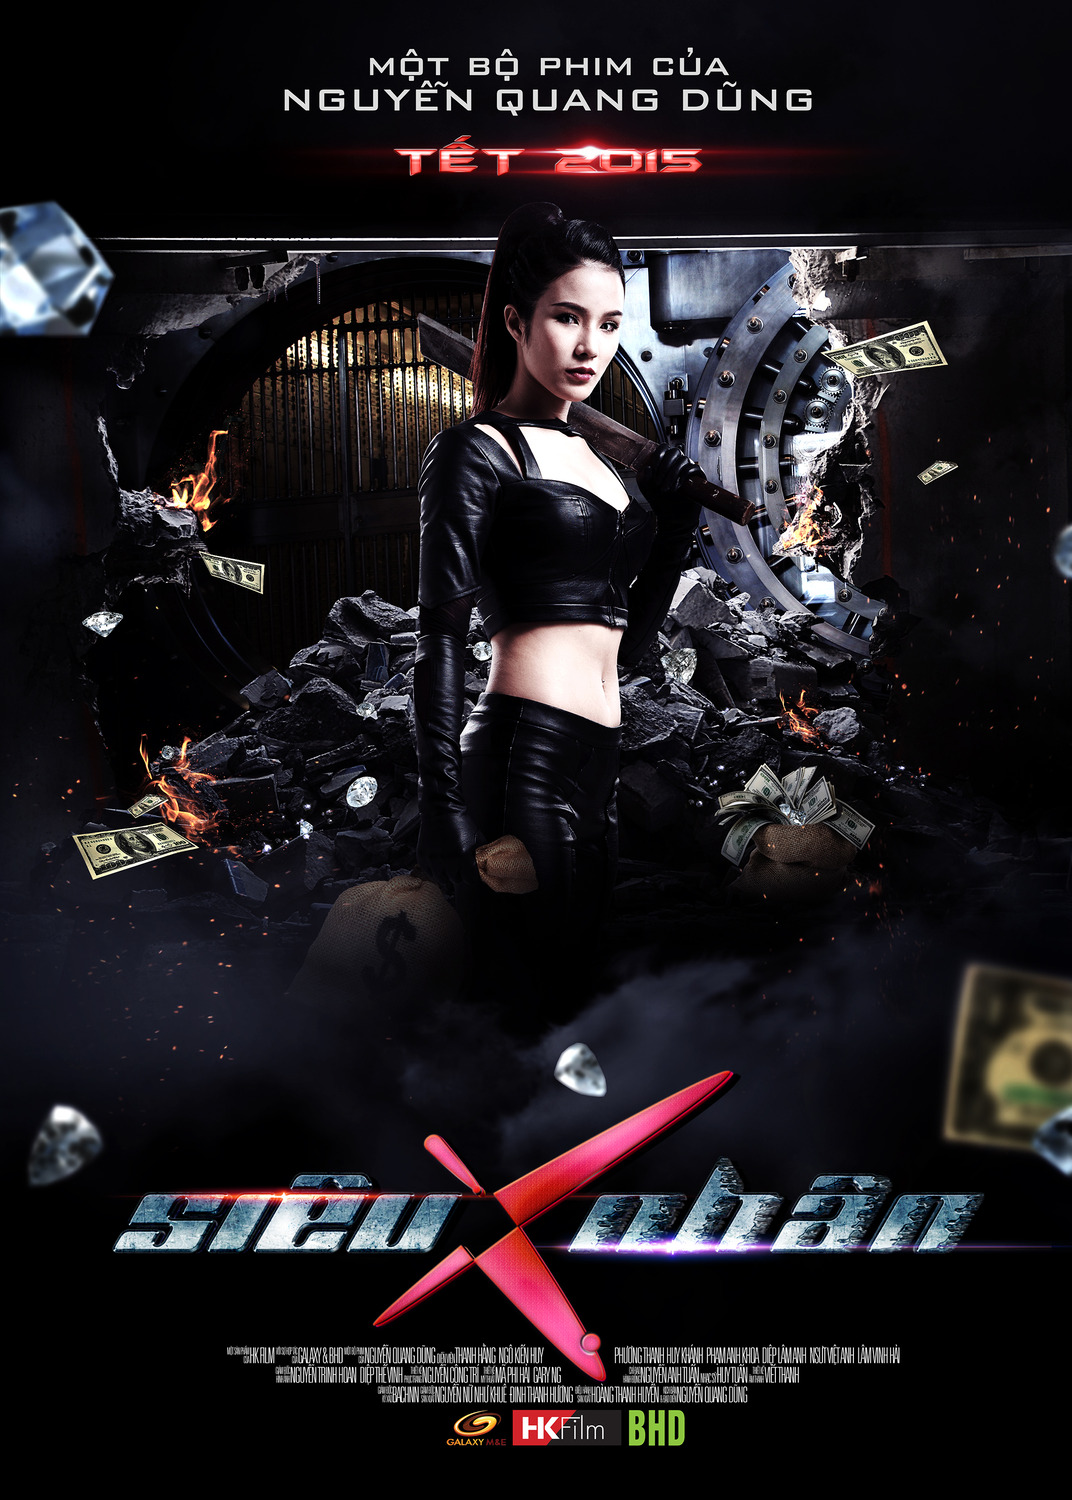 Extra Large Movie Poster Image for Sieu Nhan X: Super X (#3 of 8)